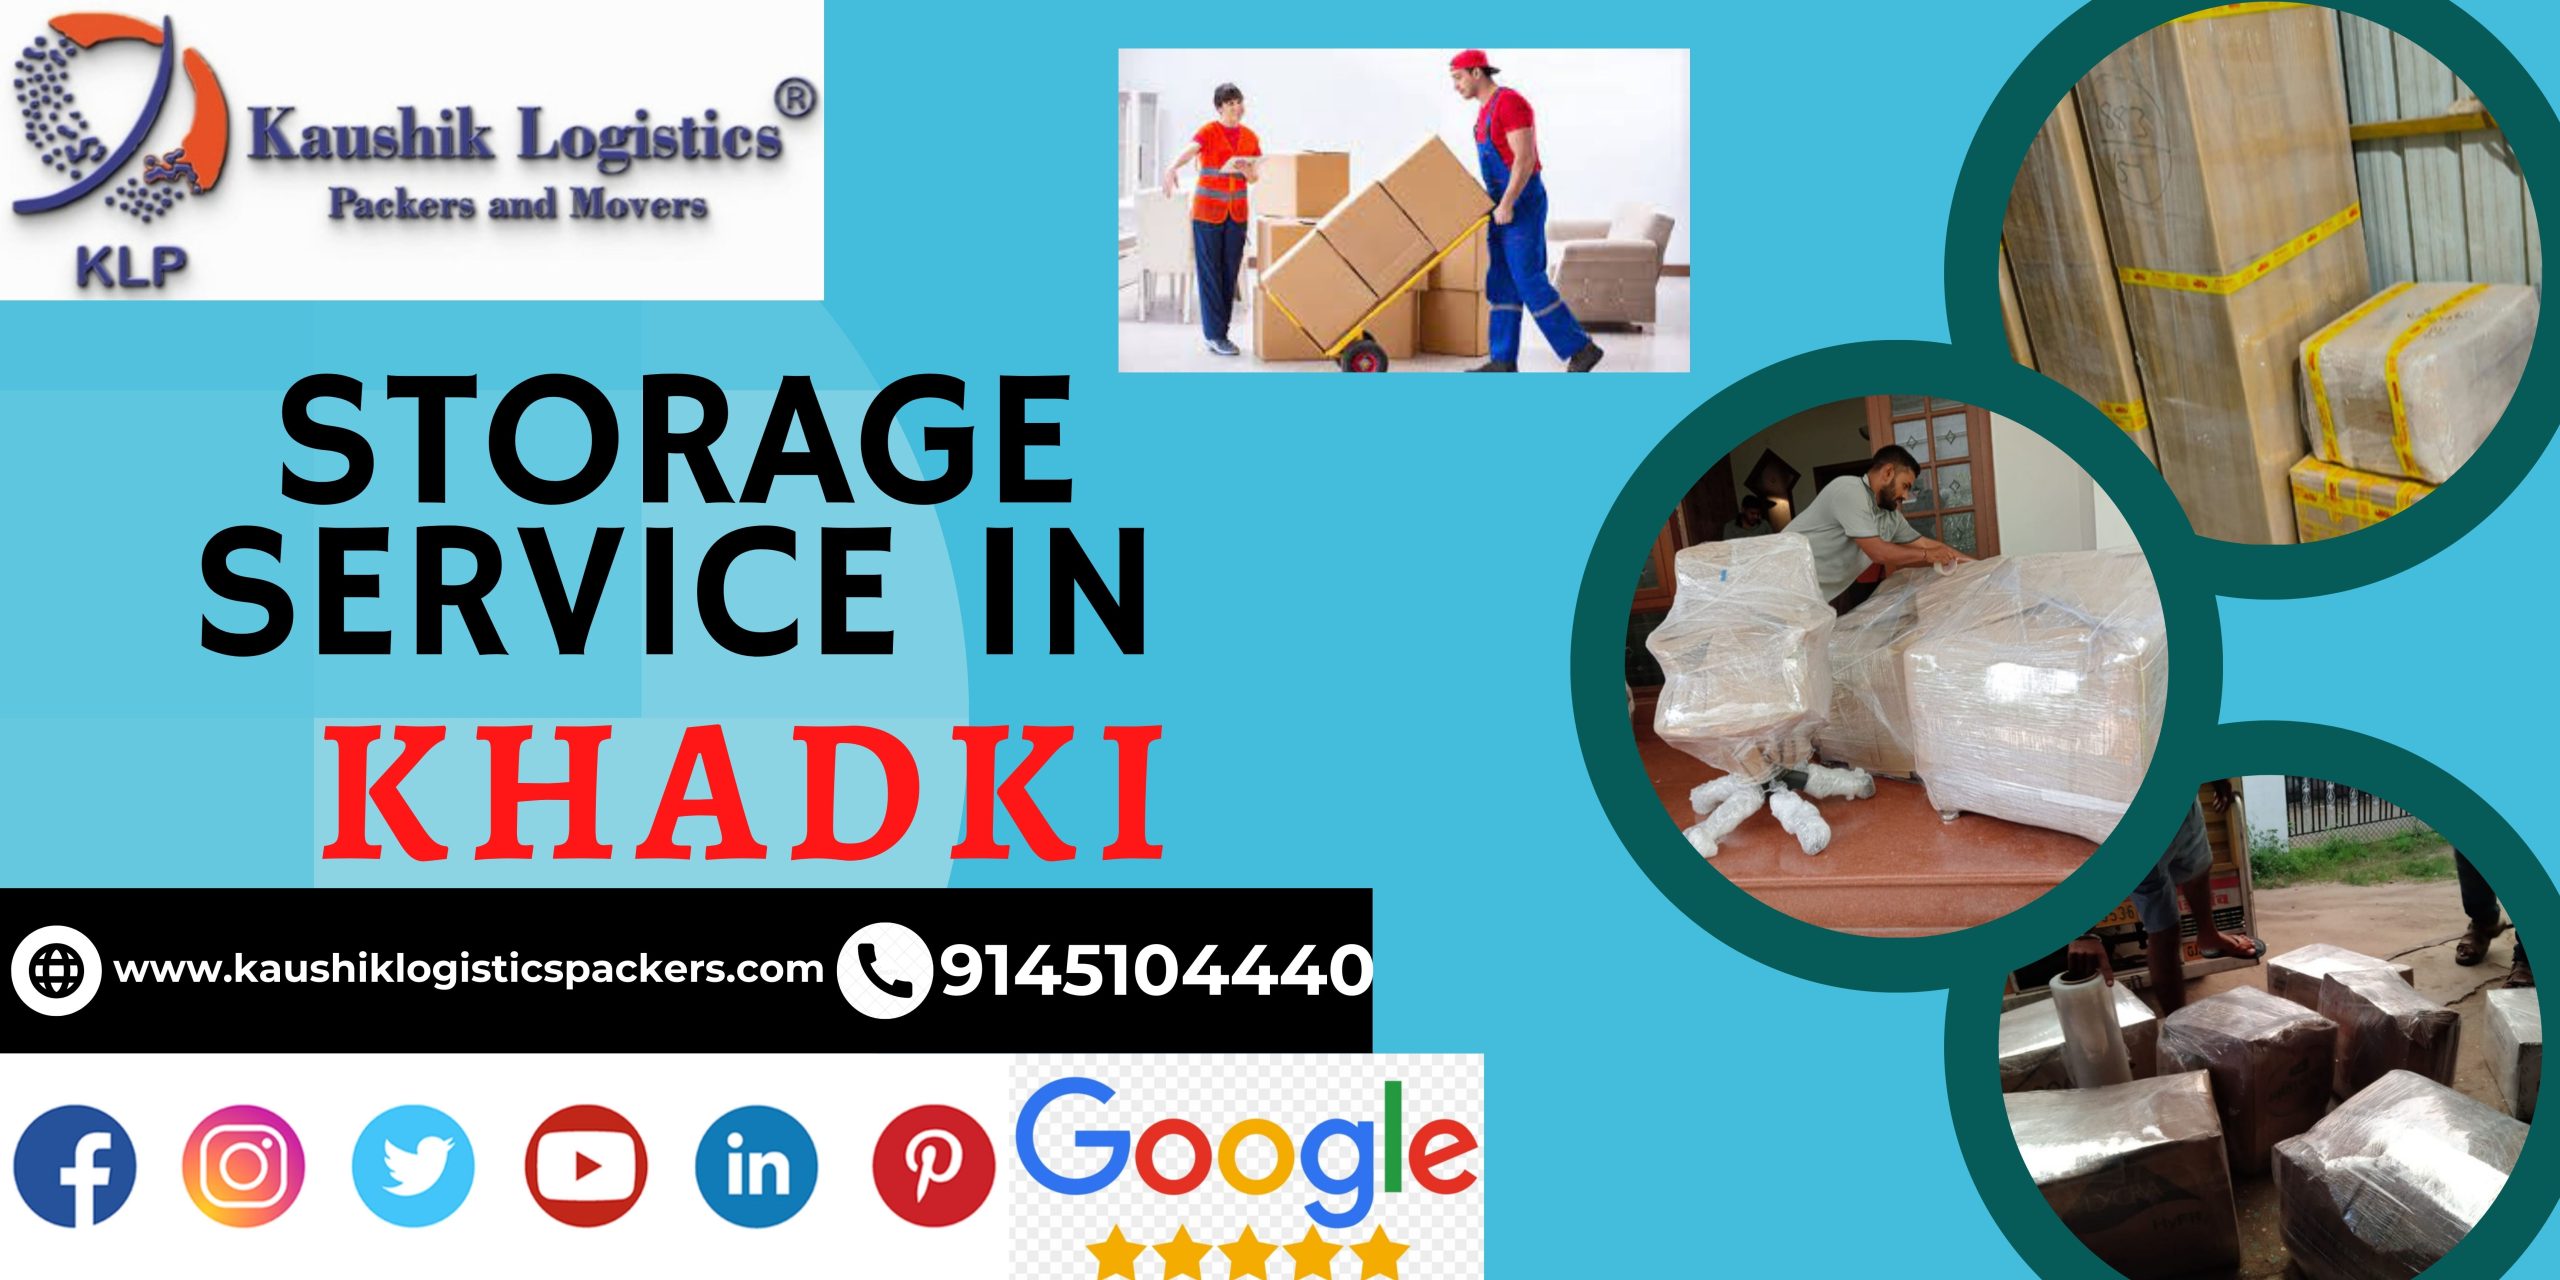 Packers and Movers In Khadki